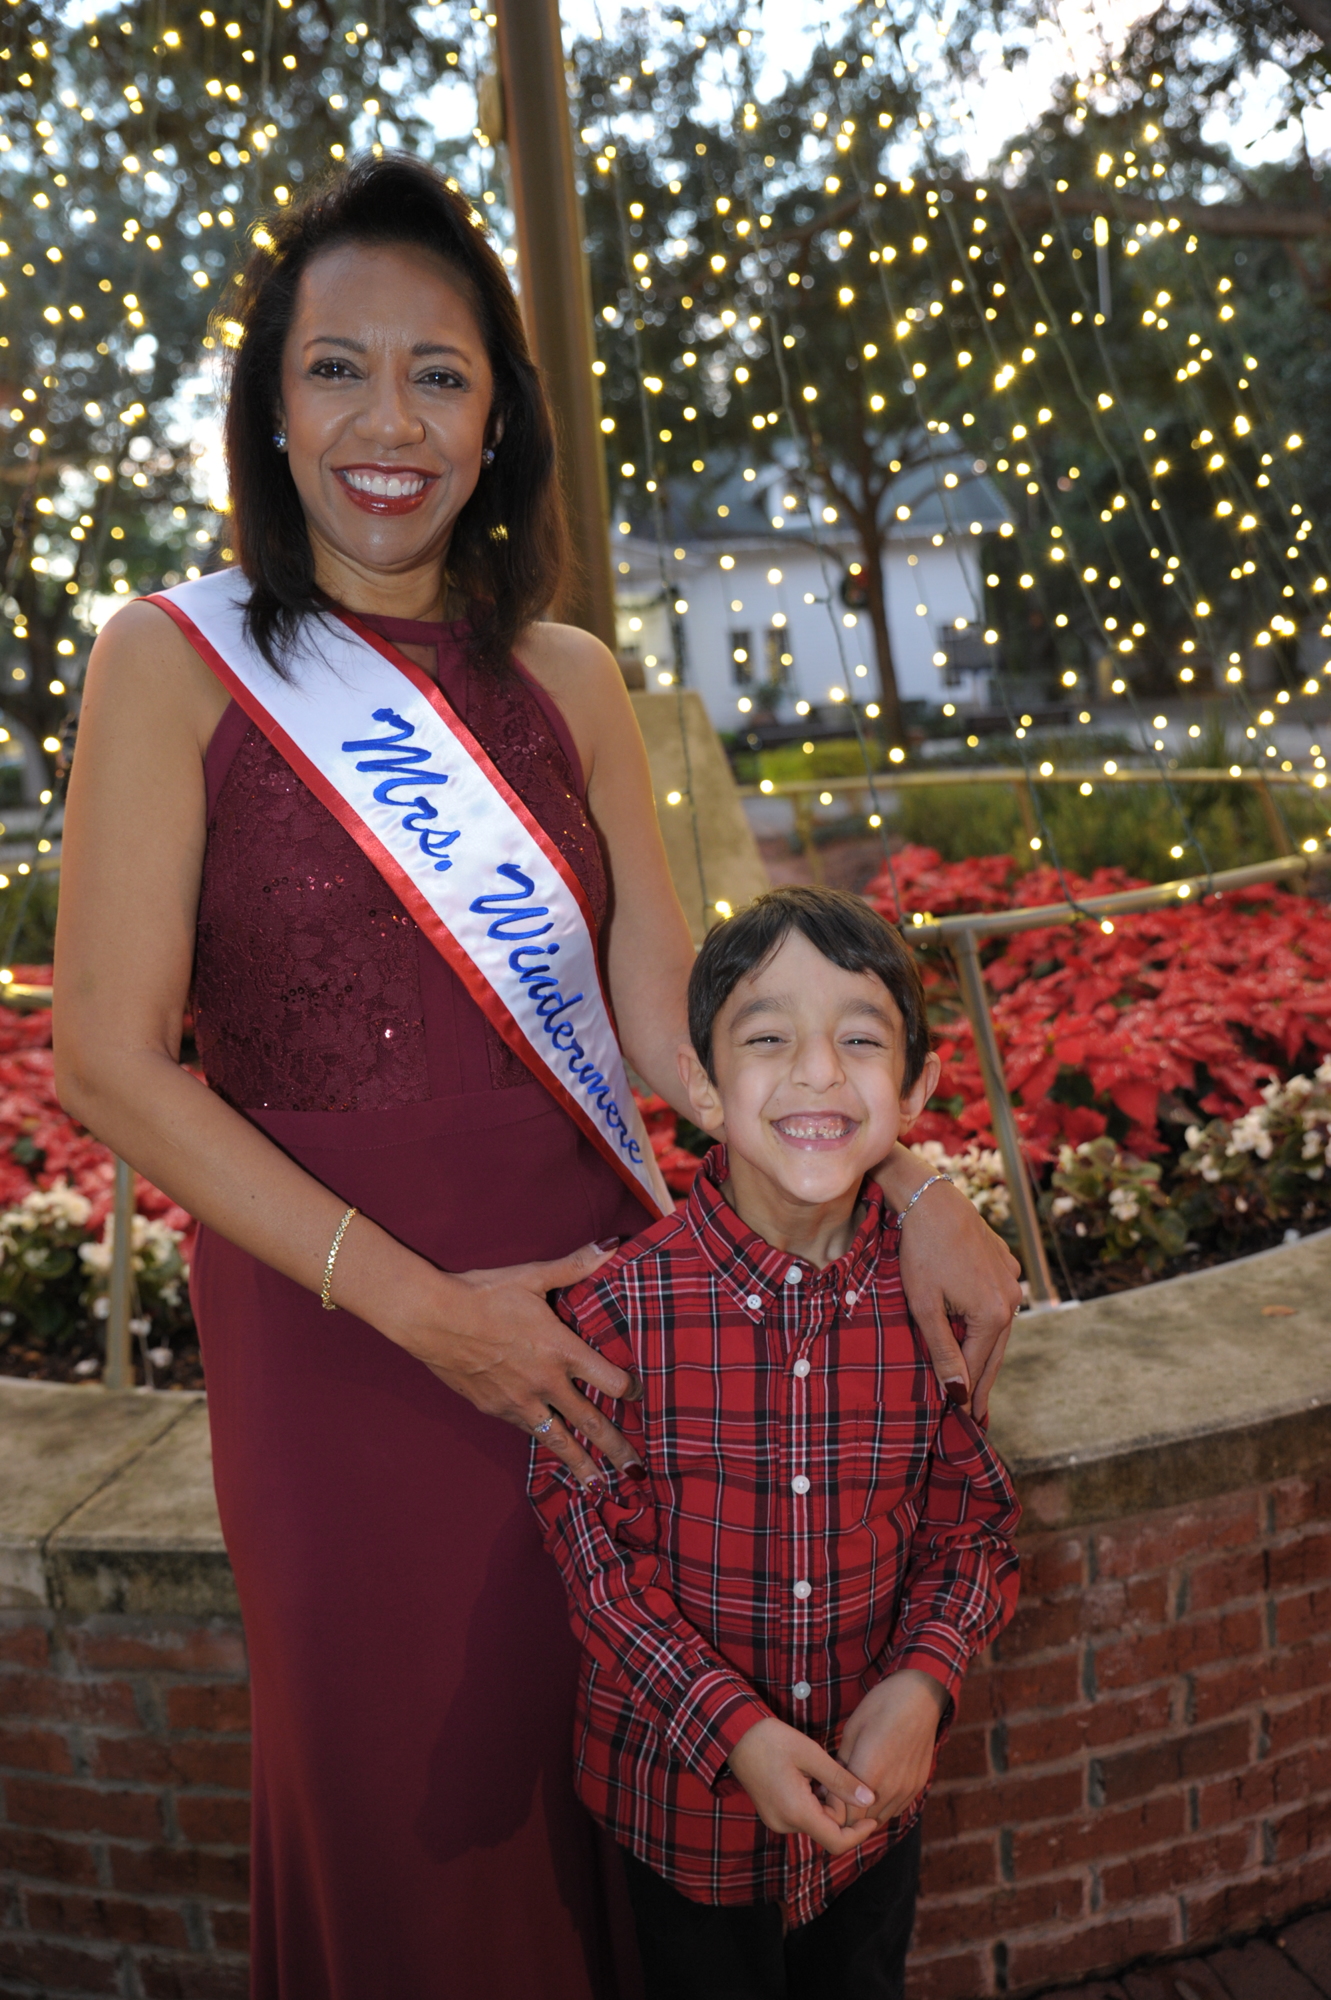 Rosie Moore, who was crowned Mrs. Windermere, poses with her son, Kaleb.